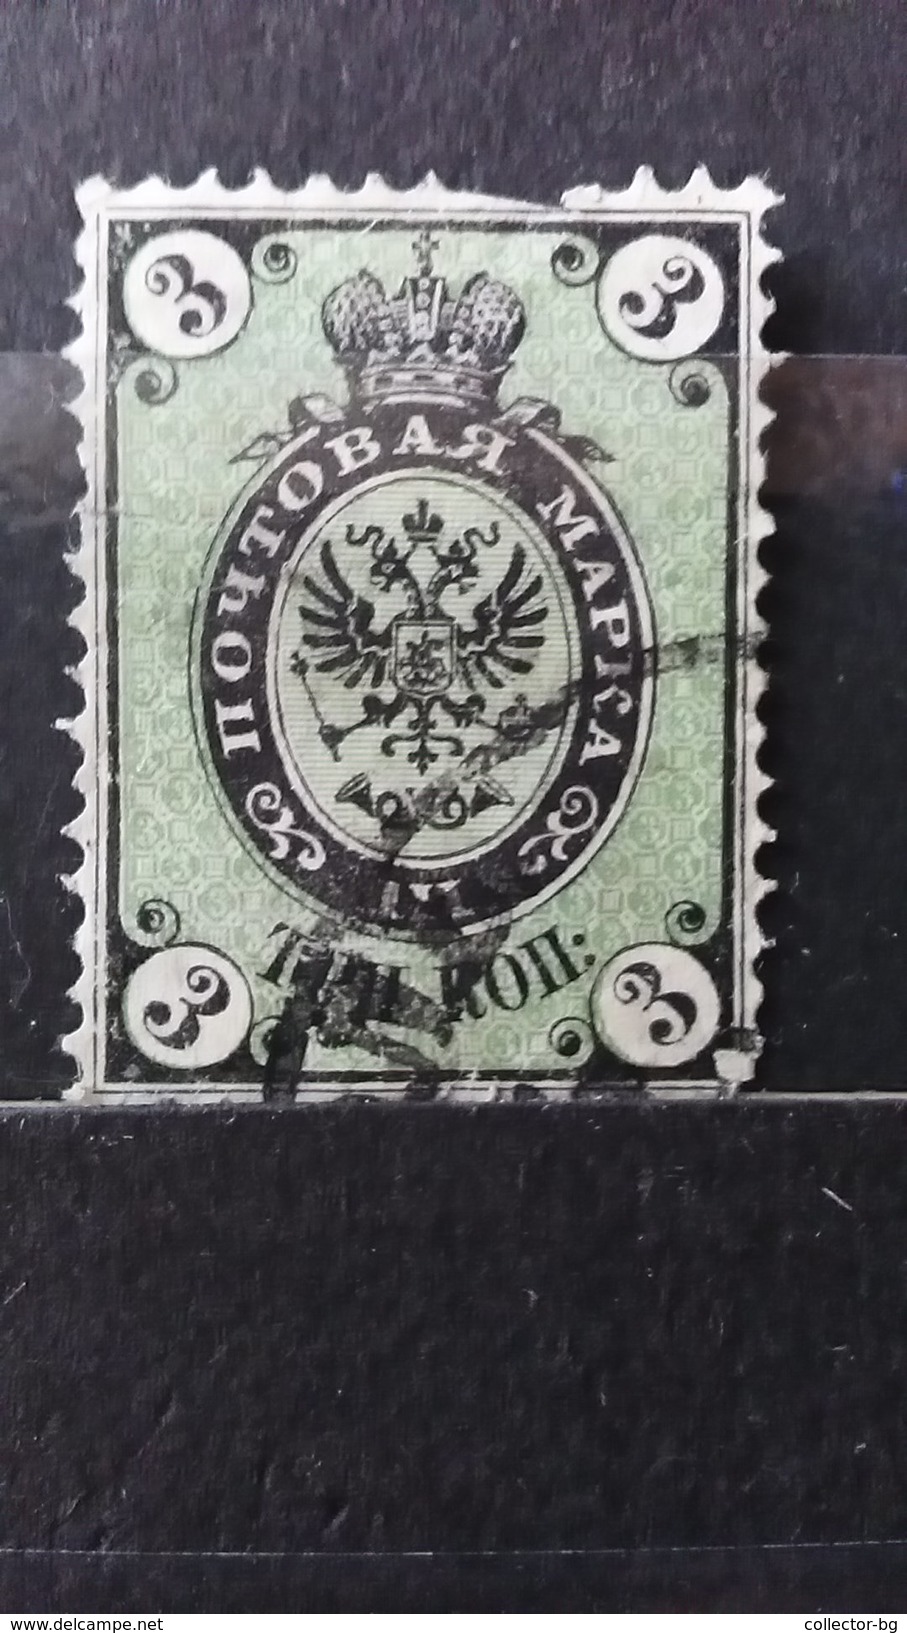 RARE 3 K KOP RUSSIA EMPIRE BLACK GREEN 1858-64 SUPERB MP-350 STAMP  TIMBRE - Unused Stamps